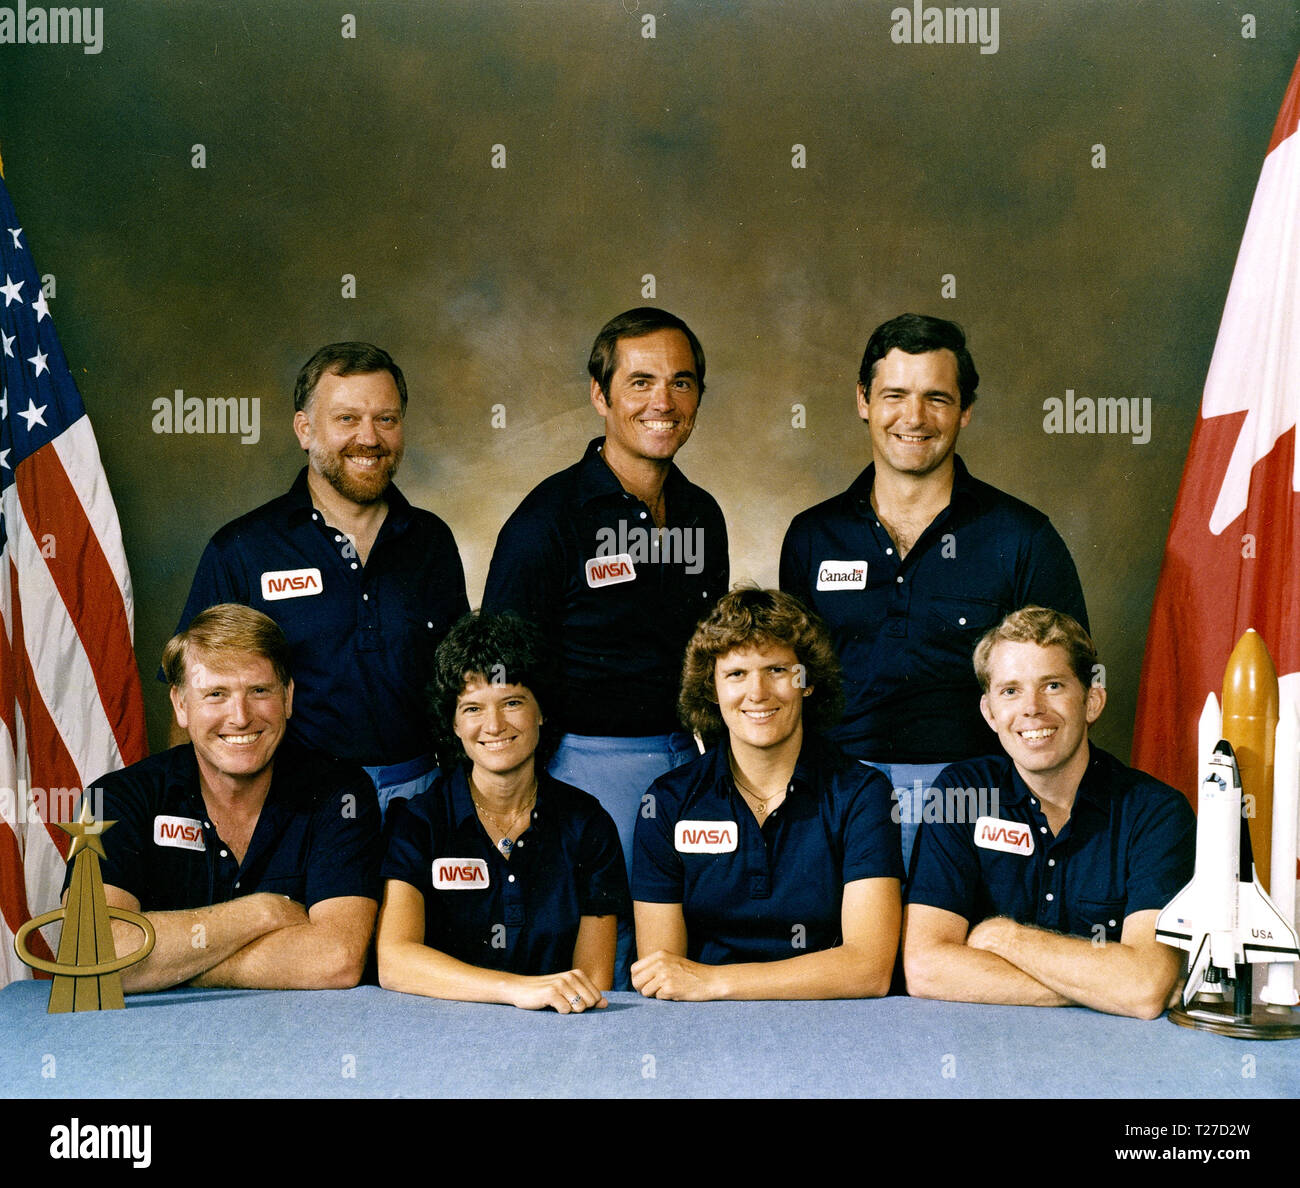 The crew assigned to the STS-41G mission included (seated left to right) Jon A. McBride, pilot; mission specialists Sally K. Ride, Kathryn D. Sullivan, and David C. Leestma. Standing in the rear, left to right, are payload specialists Marc Garneau, and Paul D. Scully-Power. Stock Photo